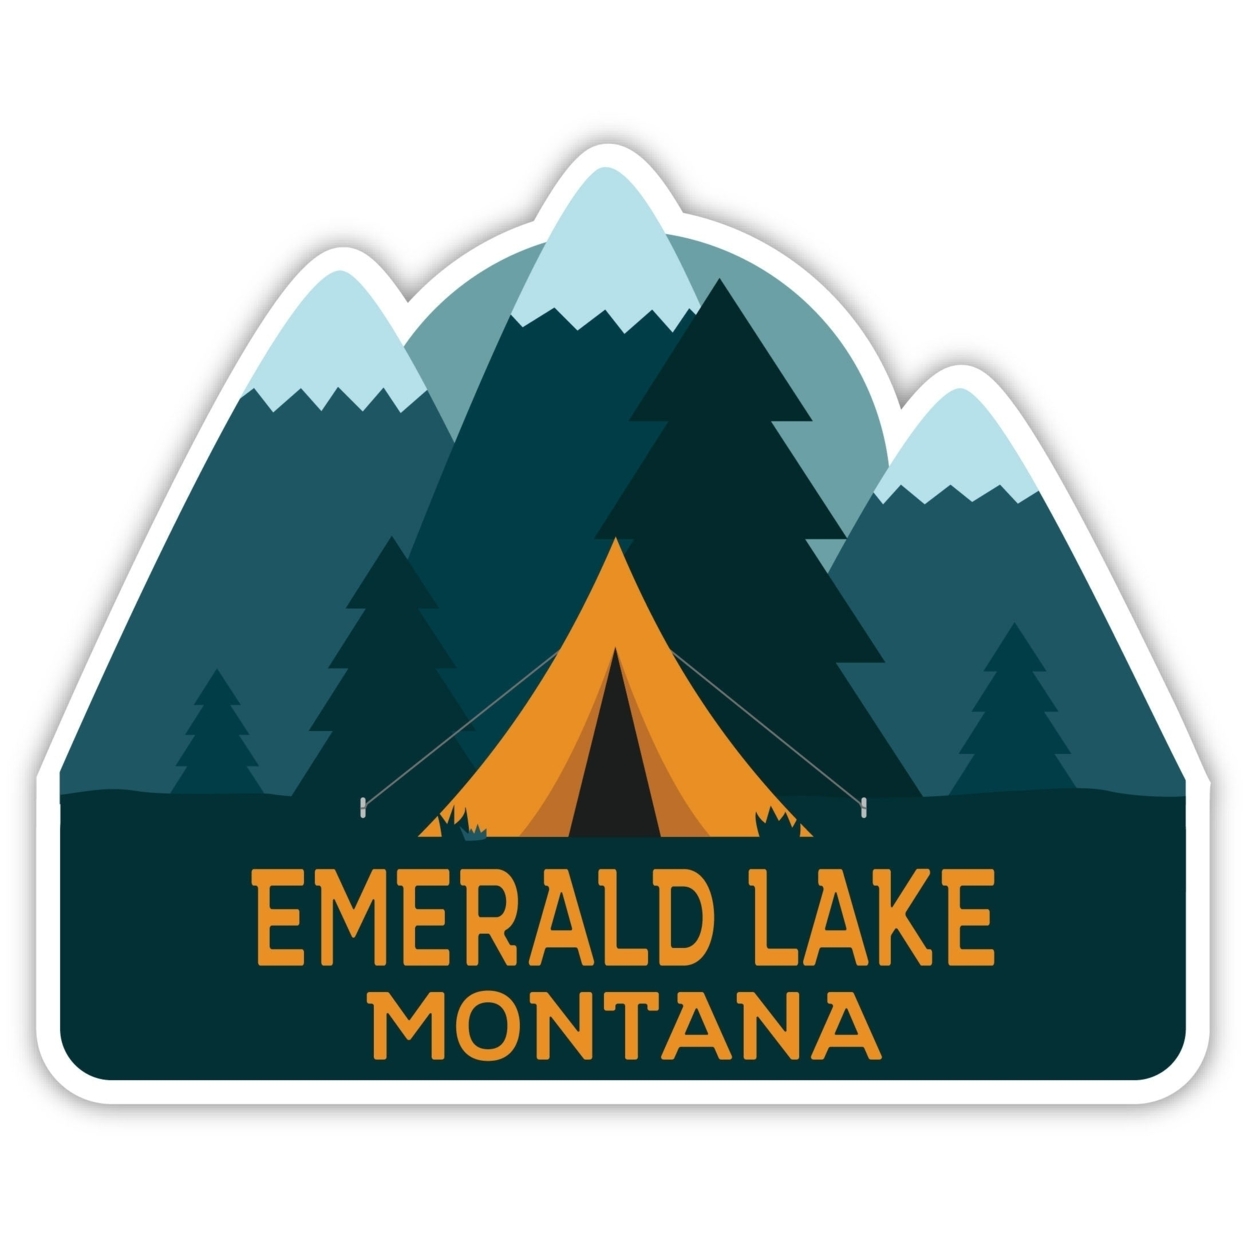 Emerald Lake Montana Souvenir Decorative Stickers (Choose Theme And Size) - 4-Pack, 2-Inch, Tent